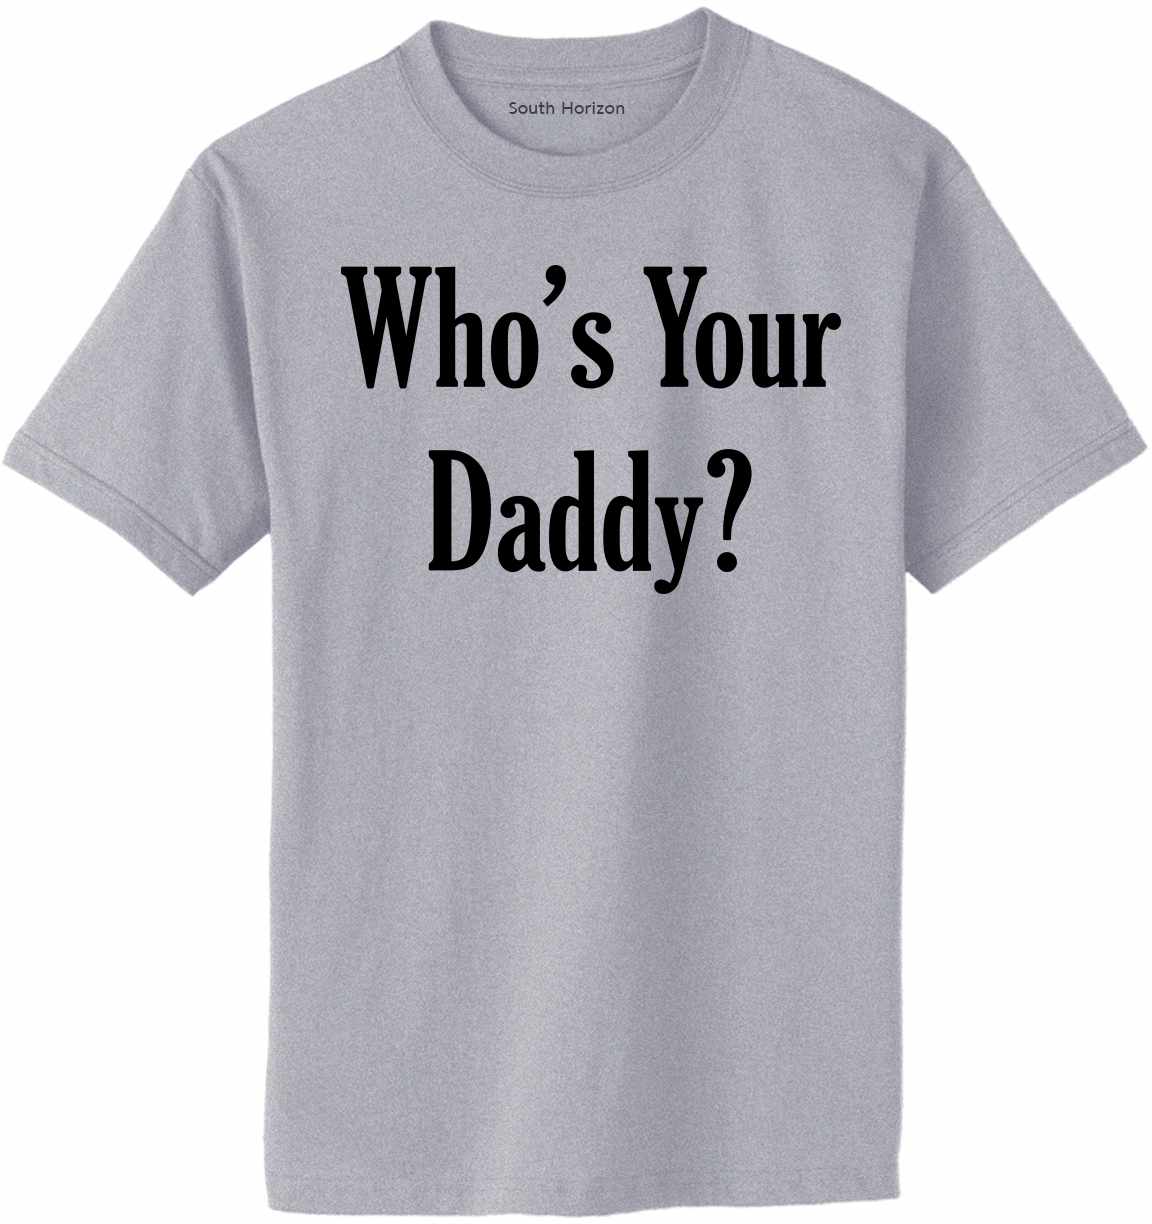 Darth Vader Who's Your Daddy T-shirt. By Artistshot